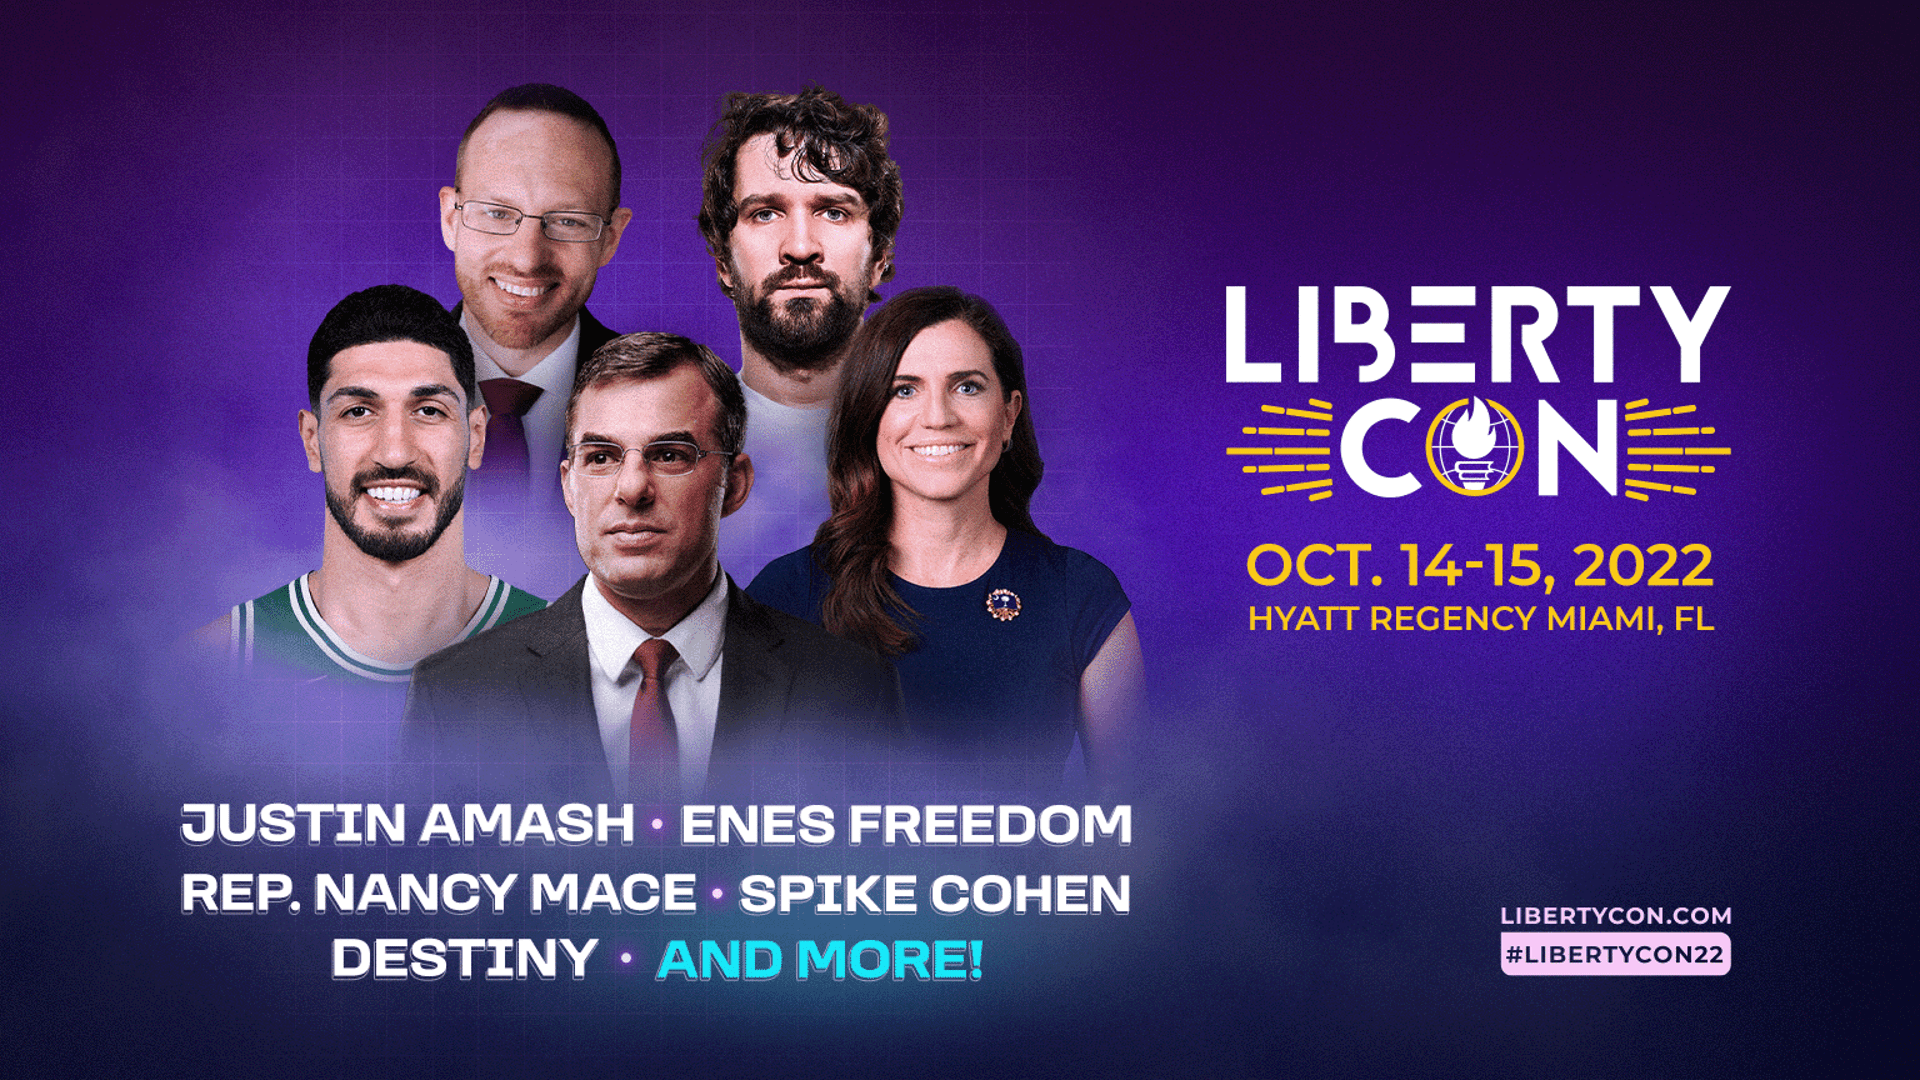 We are pleased to announce the lineup for our flagship event, LibertyCon International 2022, on Oct. 14-15 at the Hyatt Regency in Miami, FL.